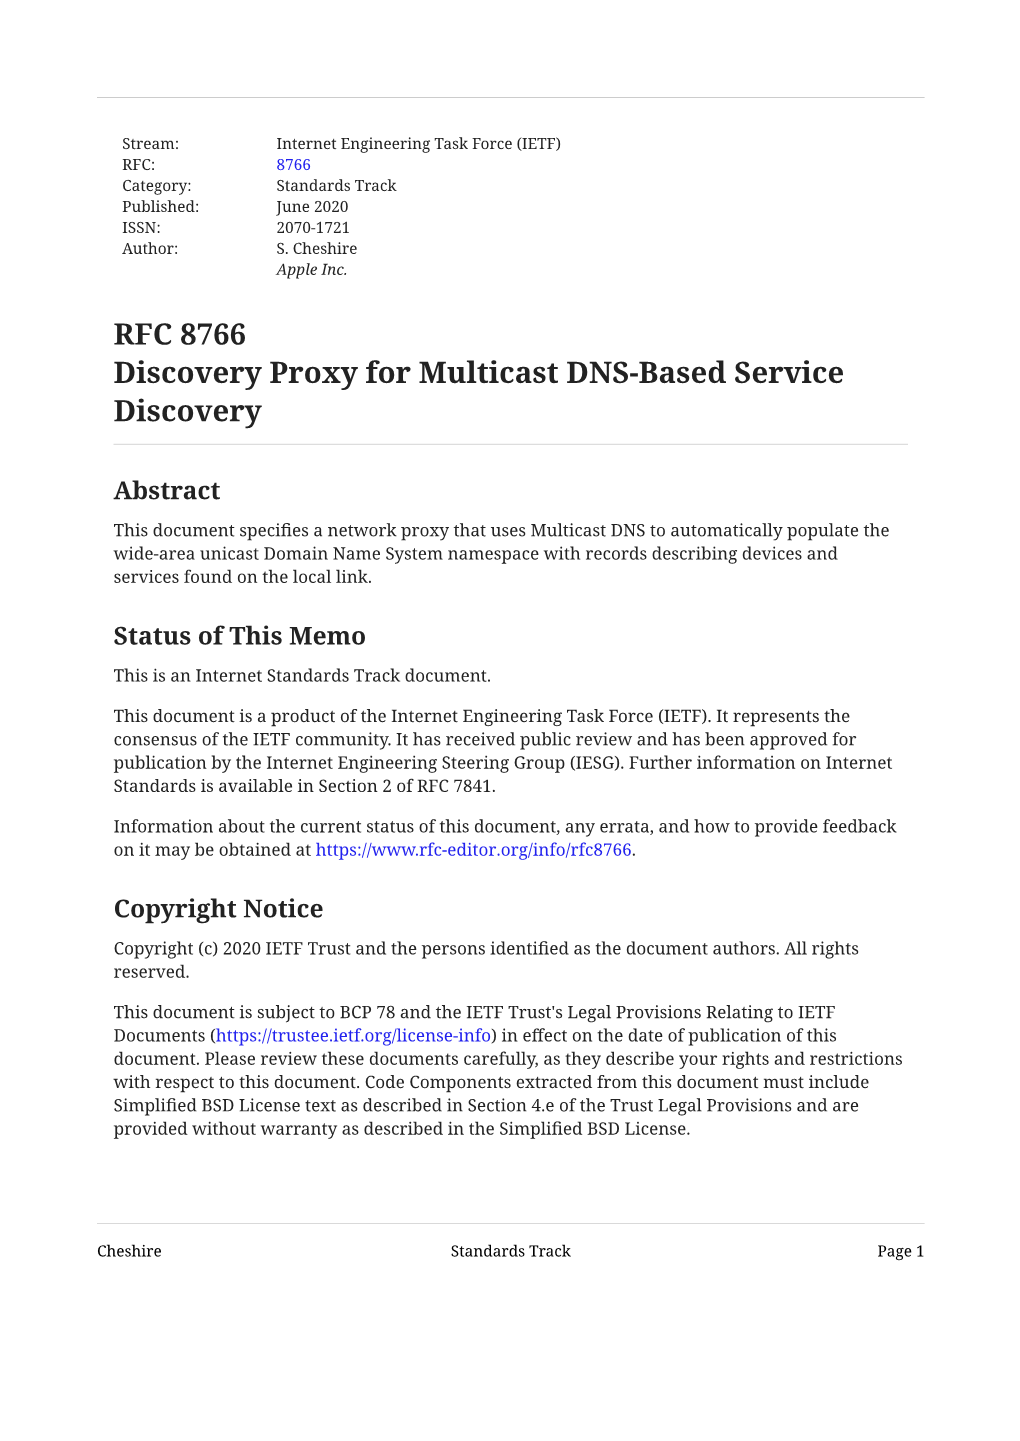 RFC 8766: Discovery Proxy for Multicast DNS-Based Service